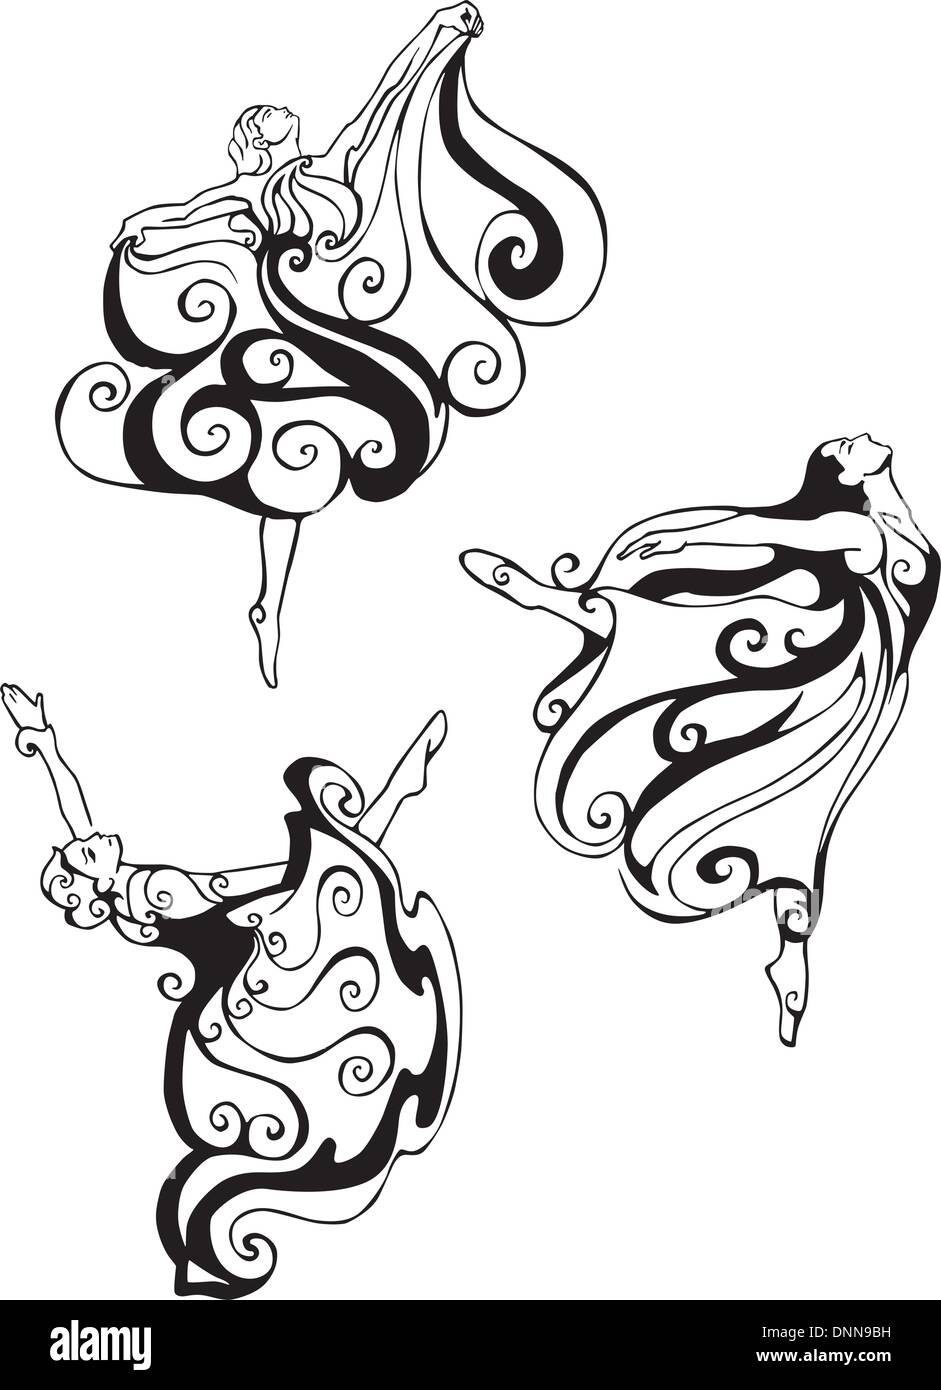 Dancing women. Set of black and white vector illustrations. Stock Vector